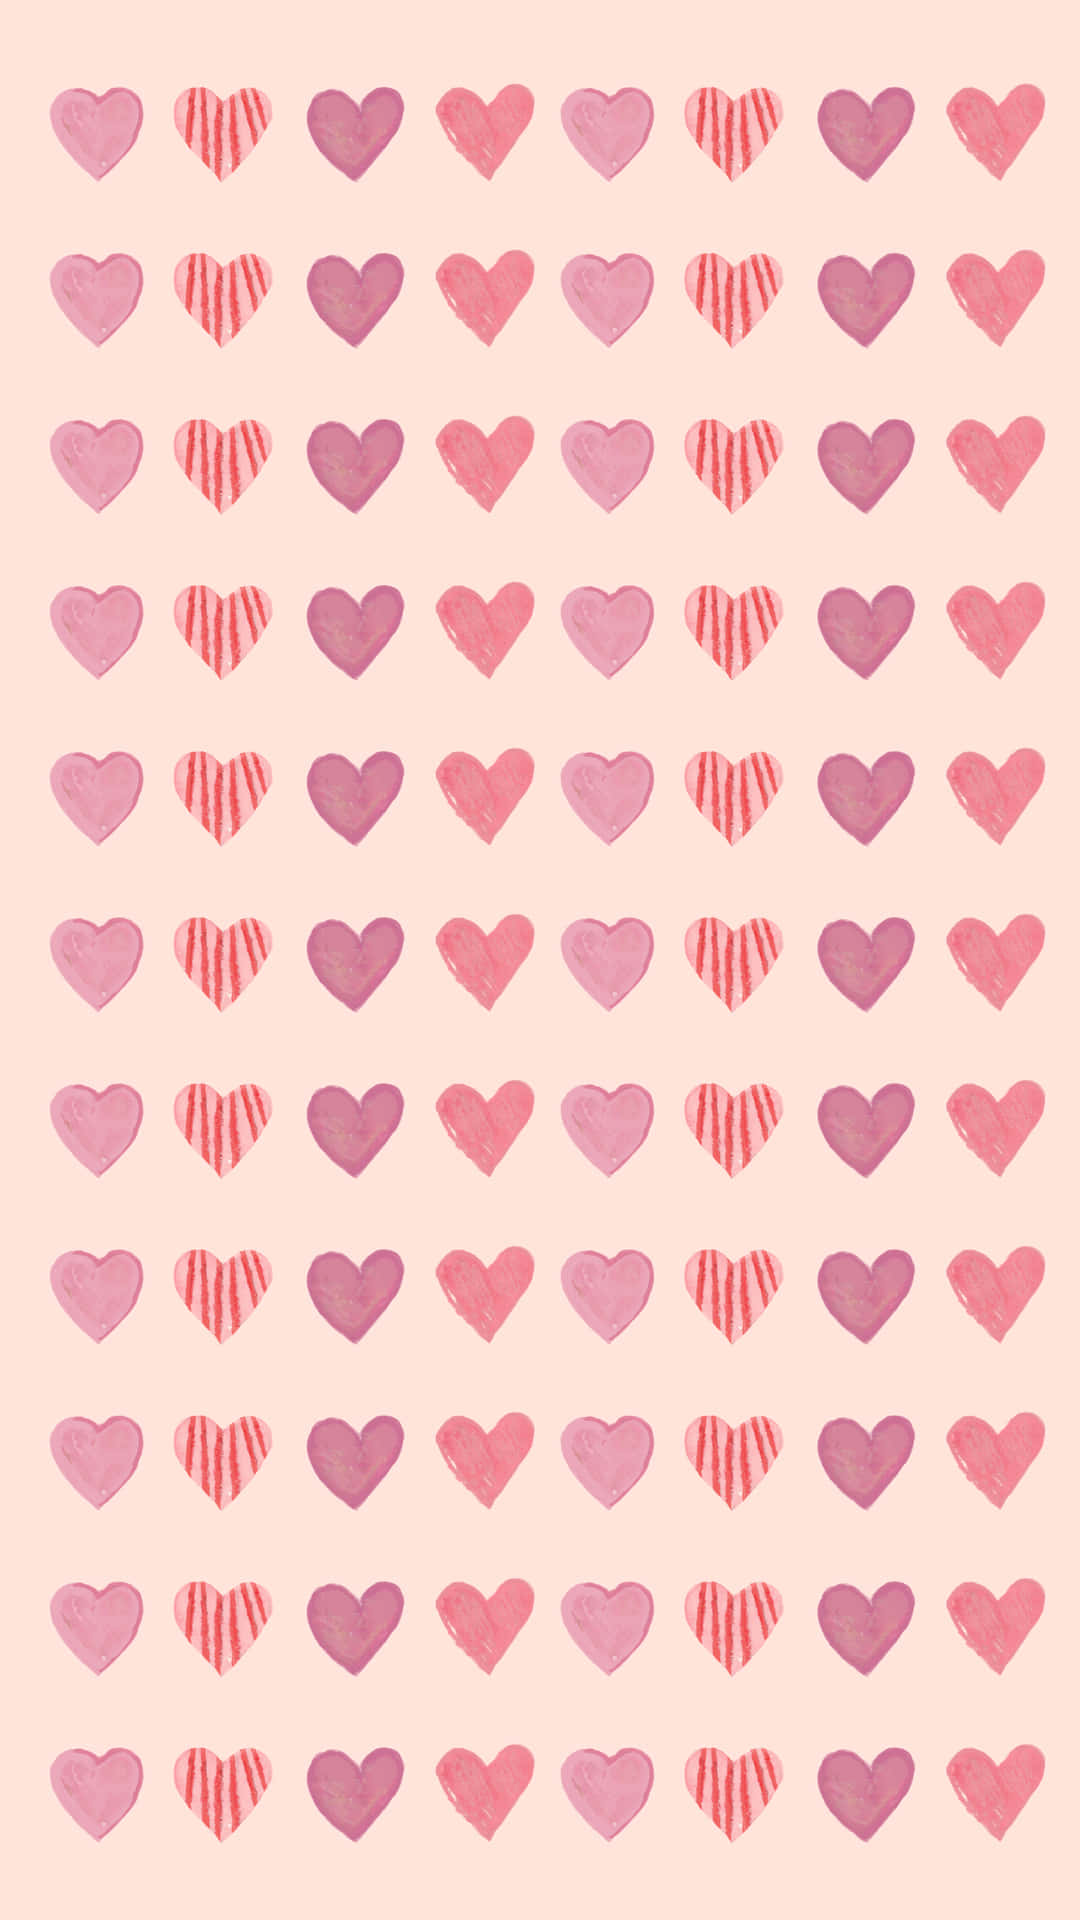 Celebrate Valentines day with the perfect phone Wallpaper